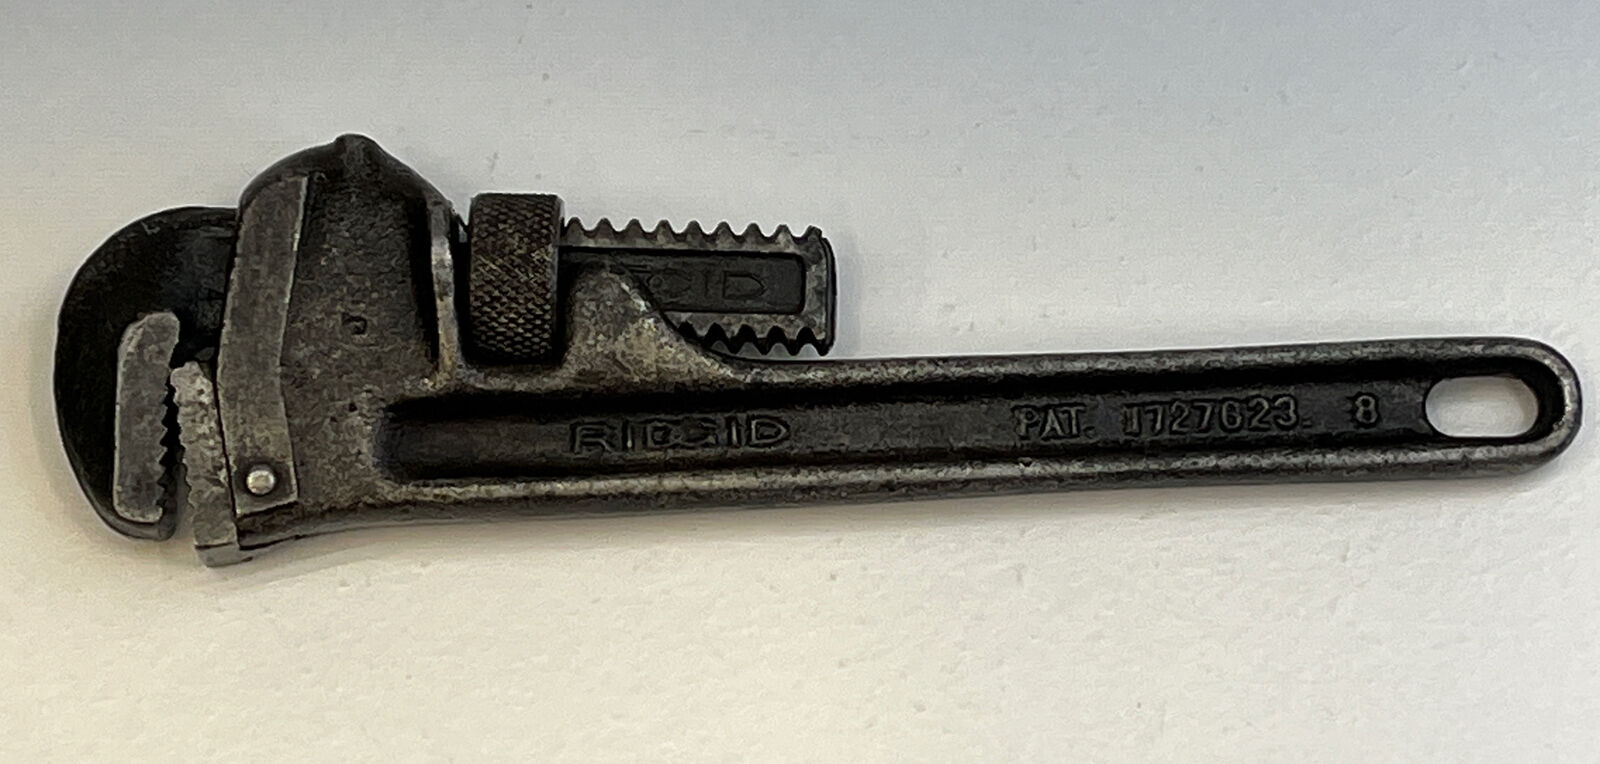 Vintage Rigid 7" Pipe Wrench Adjust From 0 to 1 In. Clean Good Teeth Working